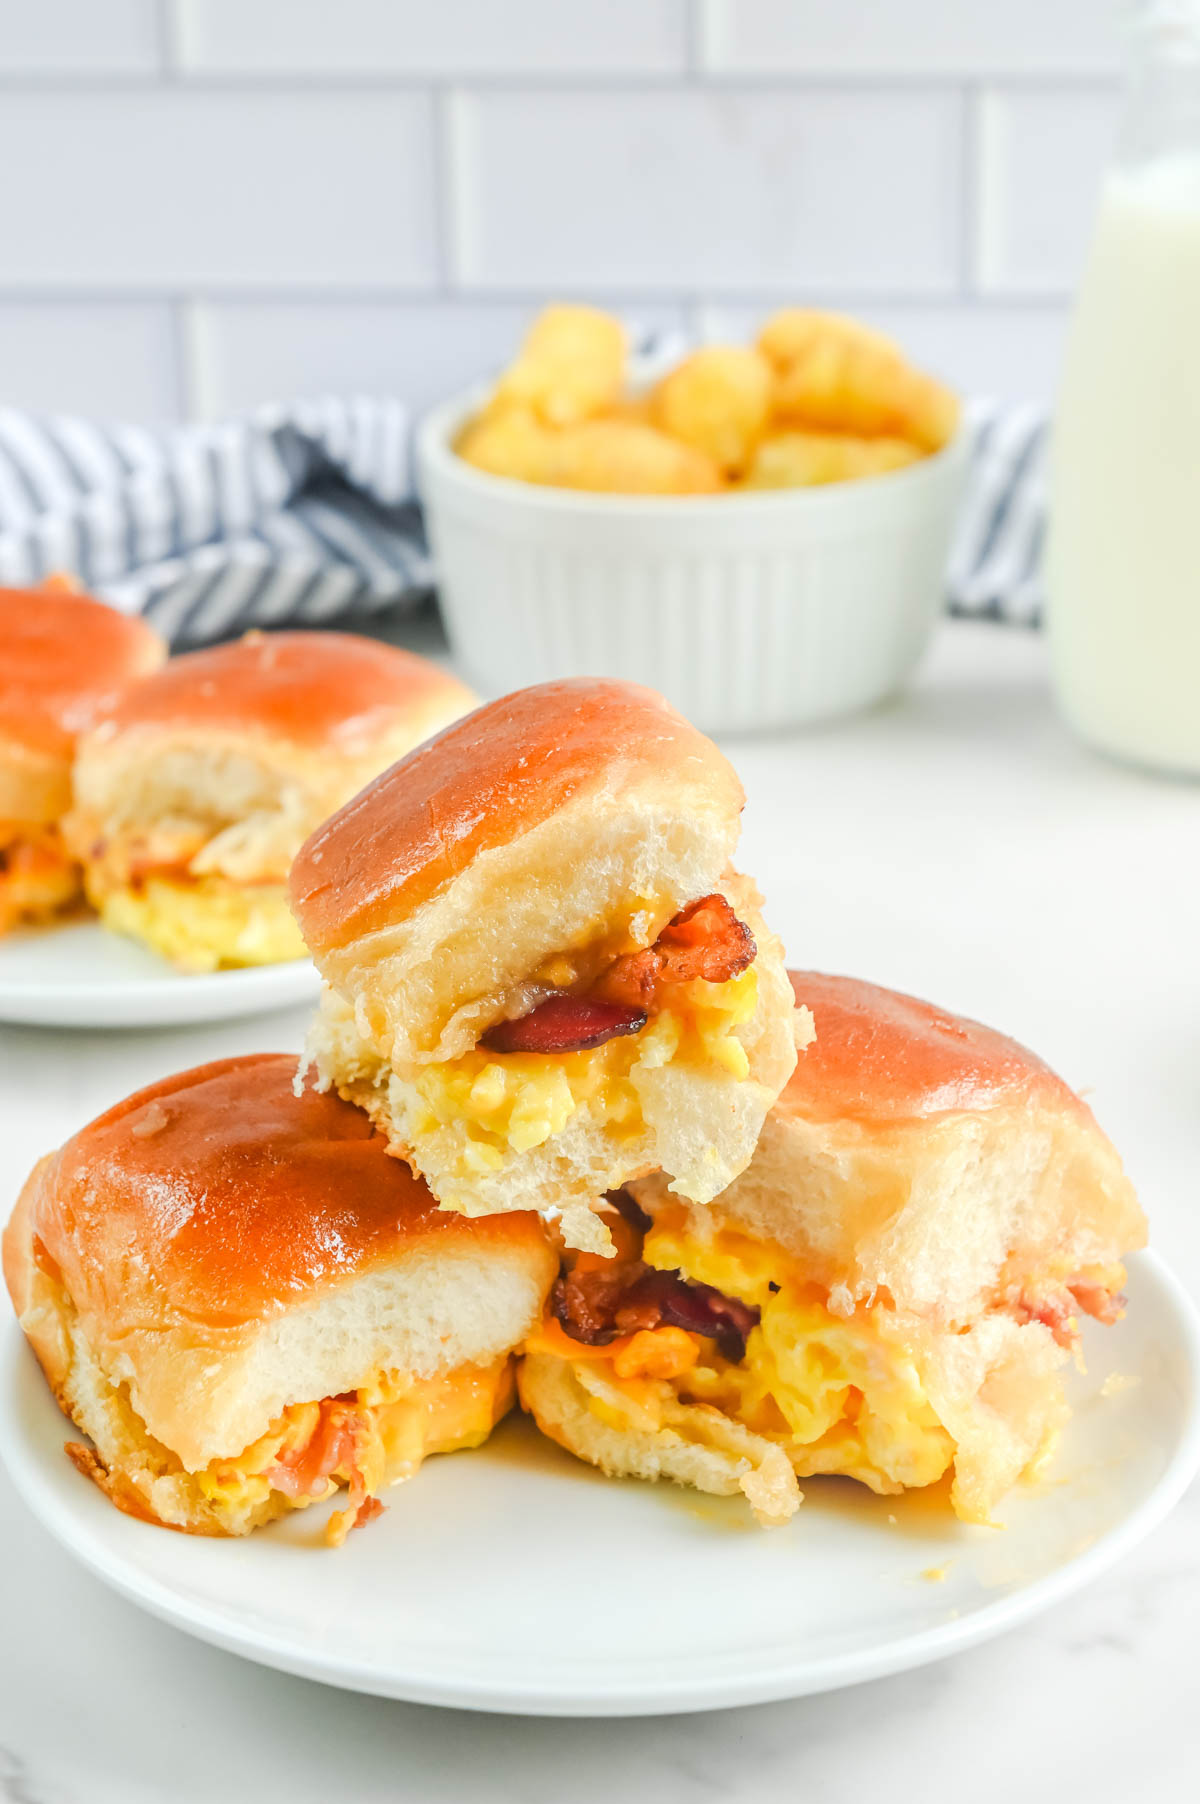 Breakfast sliders with bacon and eggs on a plate.